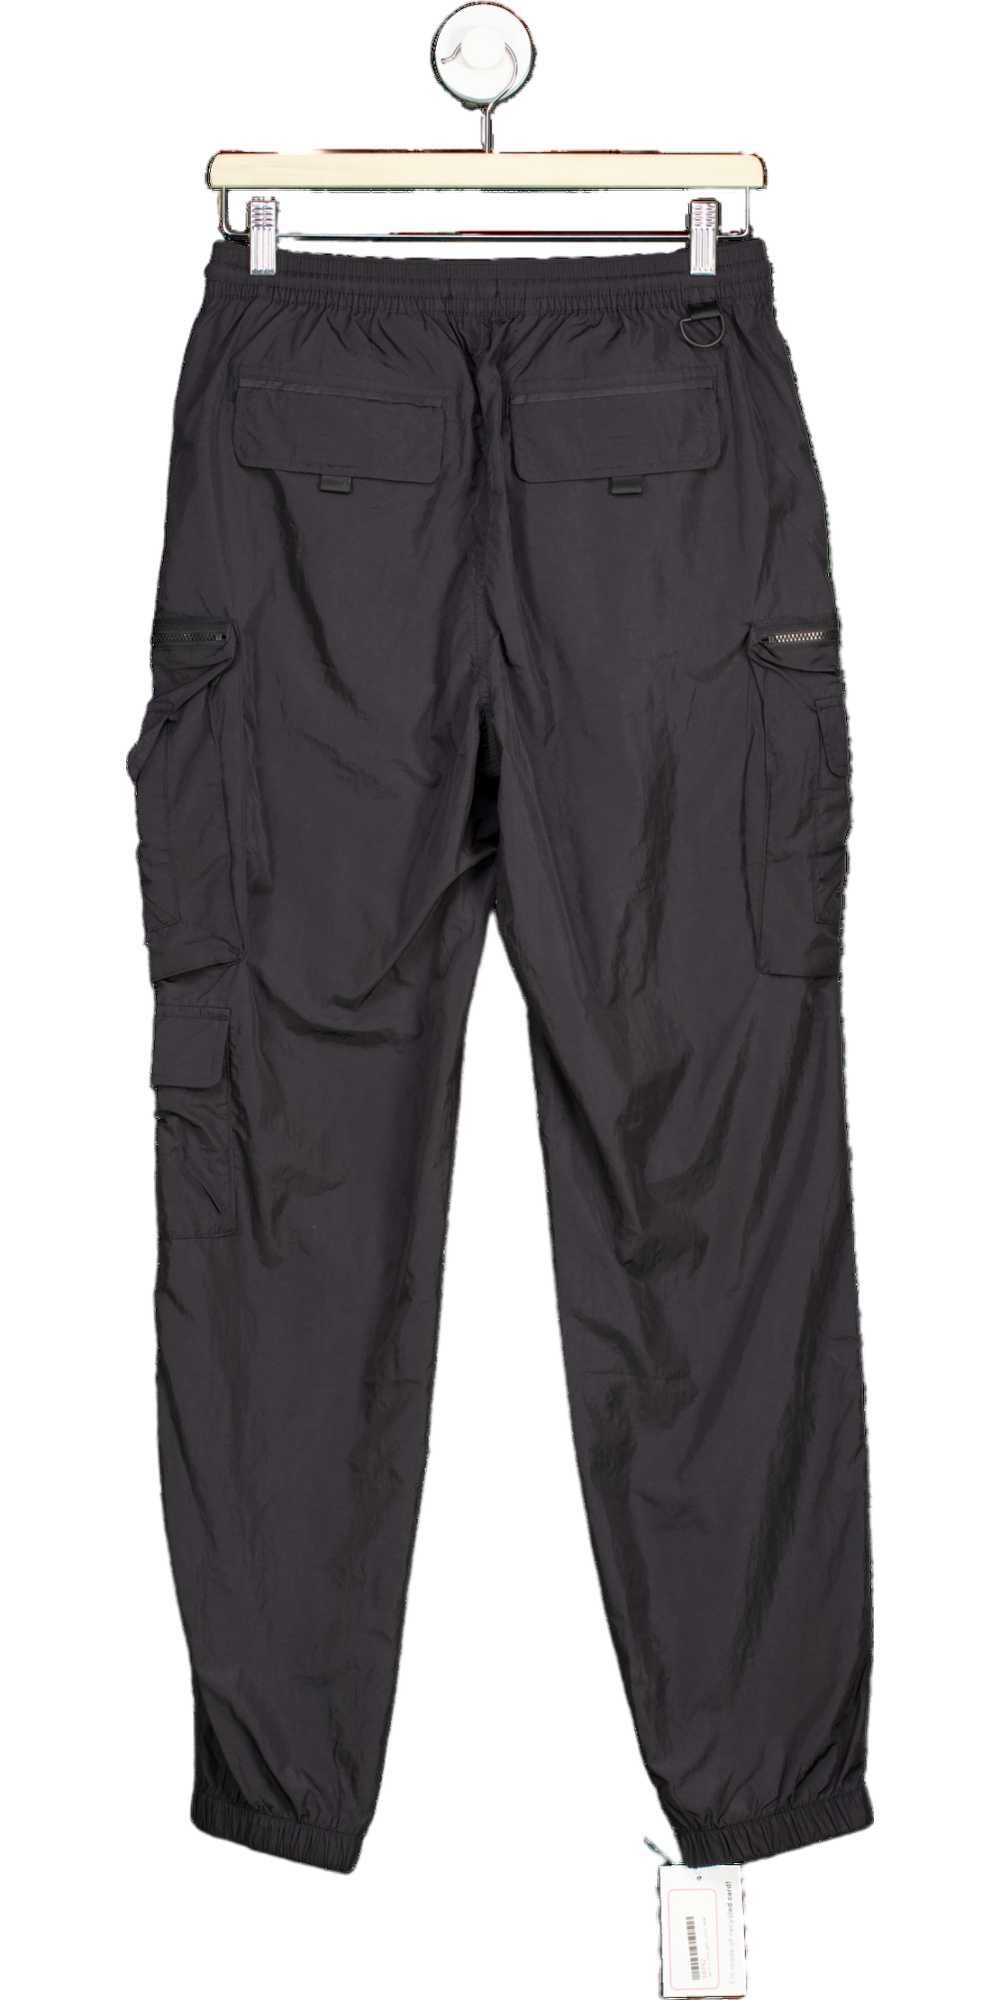 Standard Cloth Black Utility Cargo Trousers M - image 2